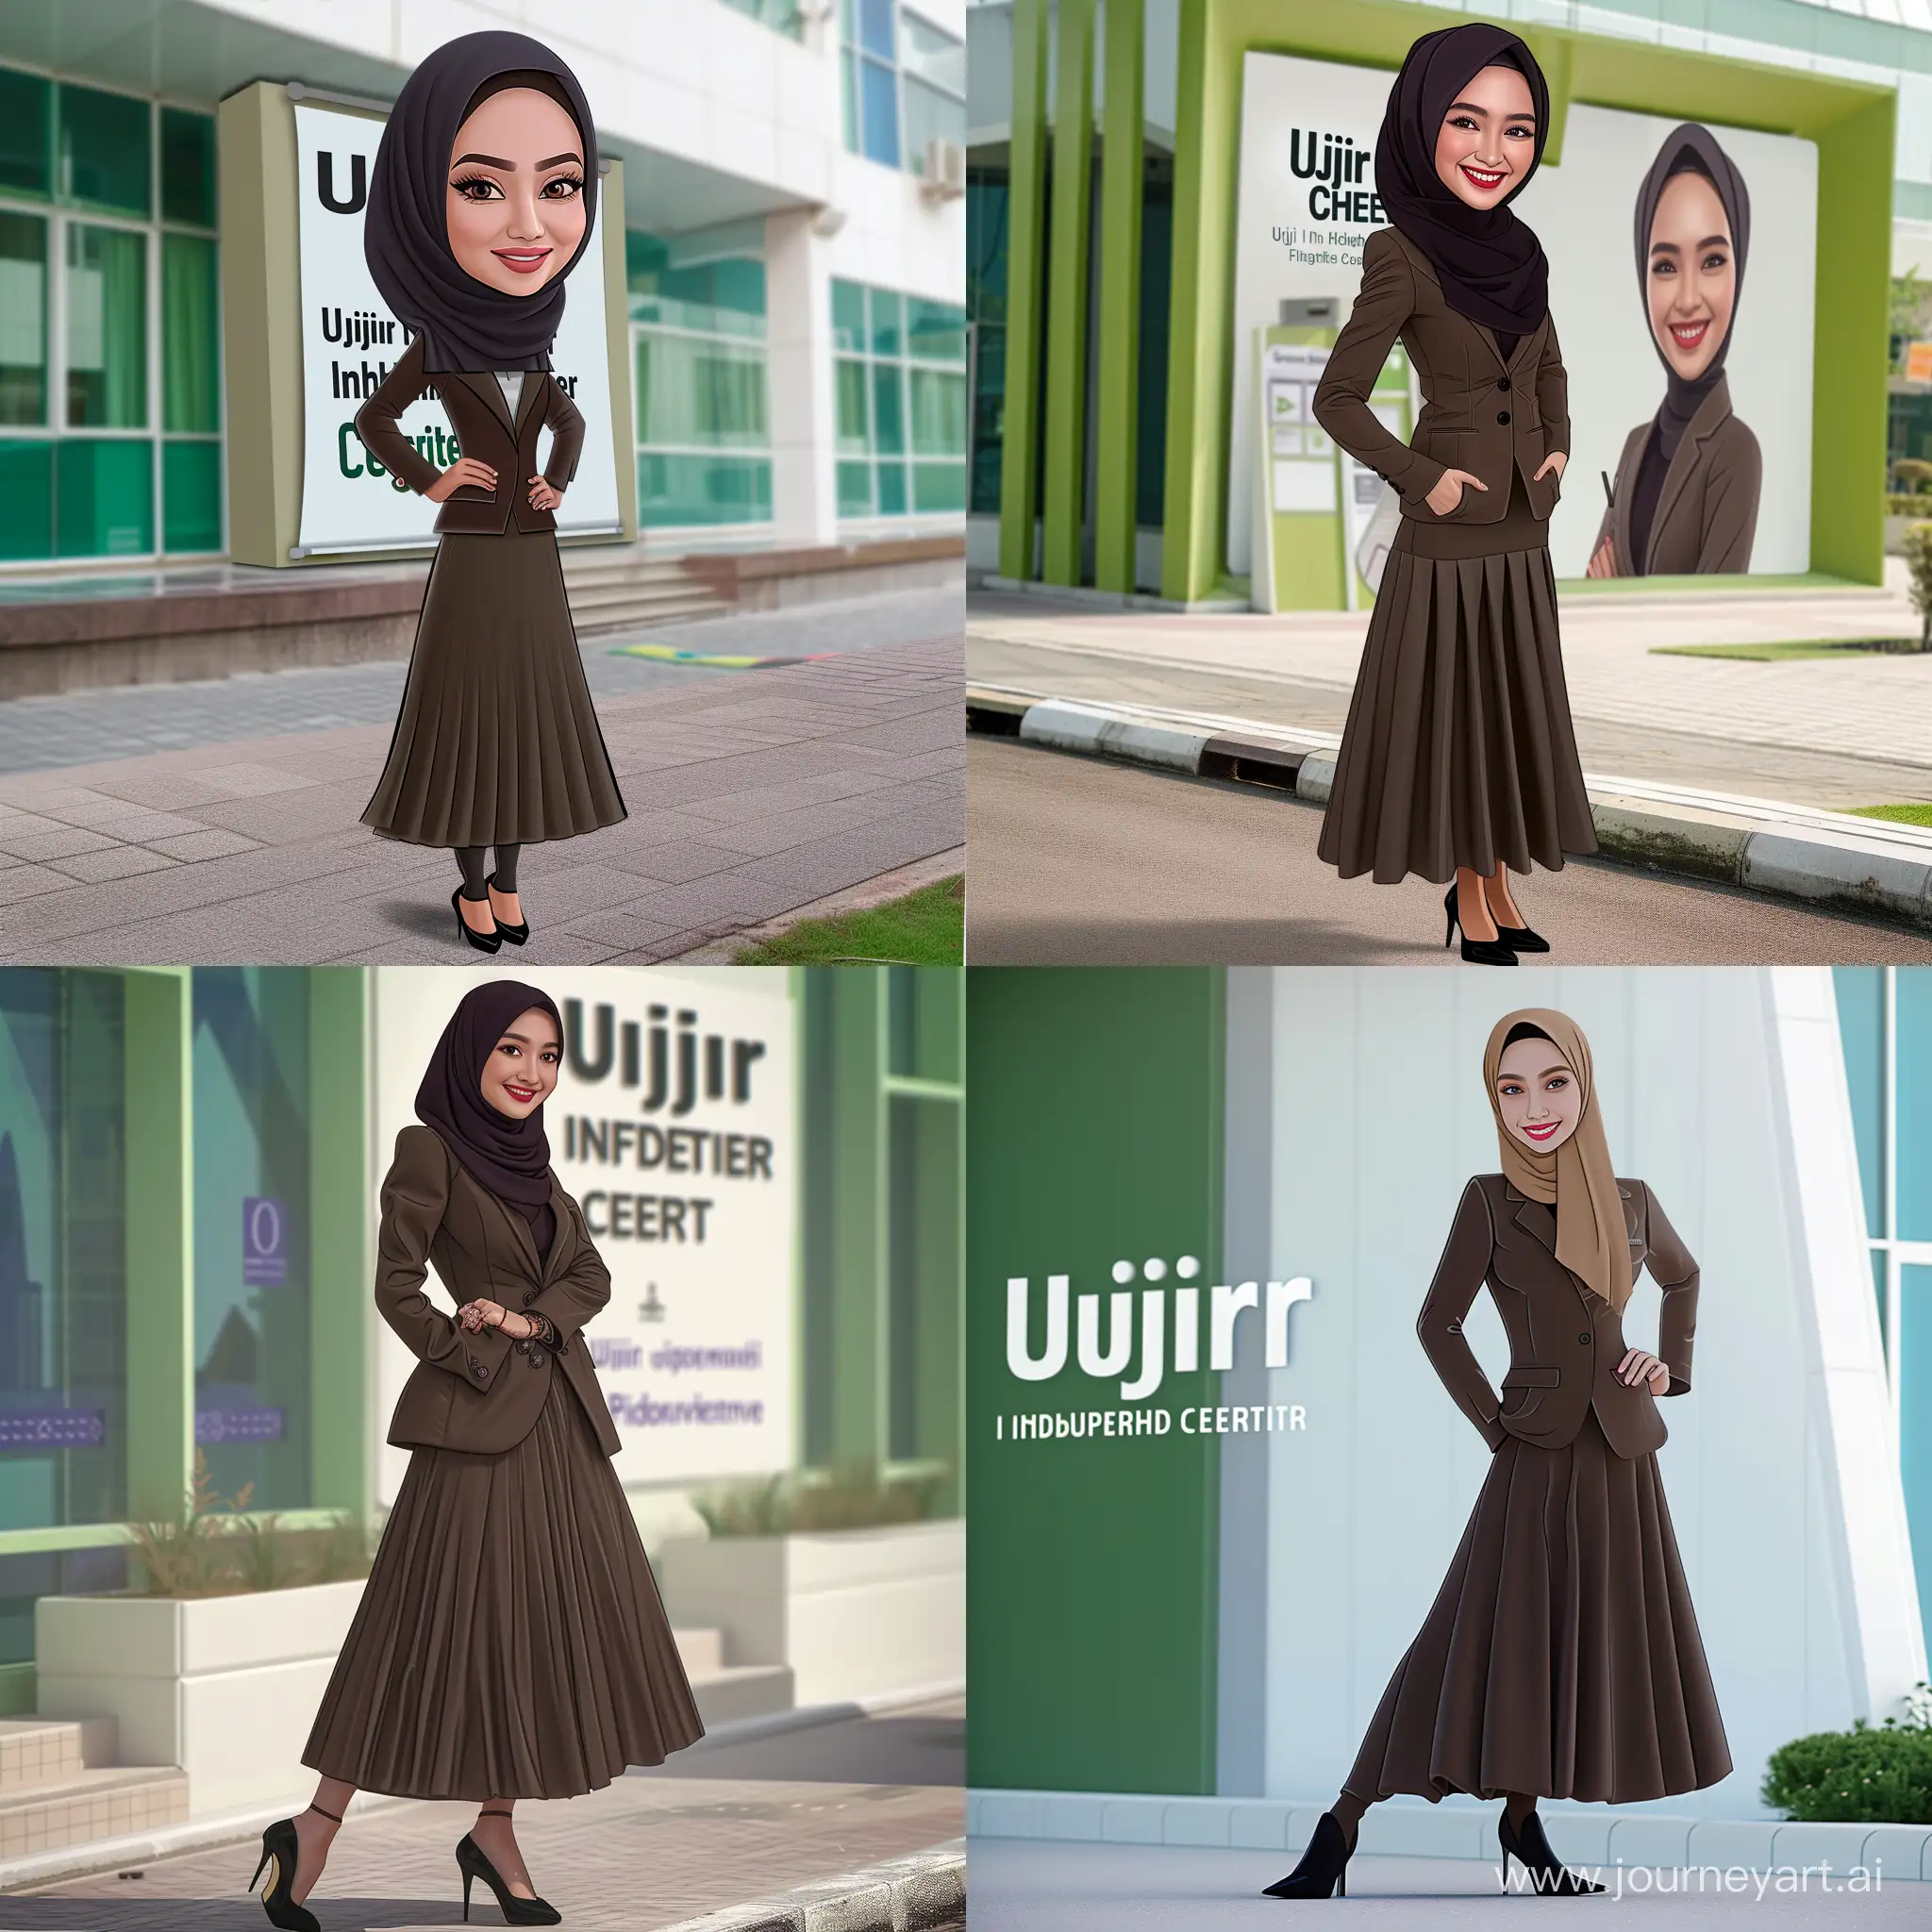 A beautiful young Indonesian woman wearing a hijab, wearing a dark brown office suit, long skirt, black heeled shoes, standing posing with a smiling face, the background is a white and green building, there is an advertisement that says "Ujir Inpatient Health Center", Caricature 5D, Detailed and realistic, hd.